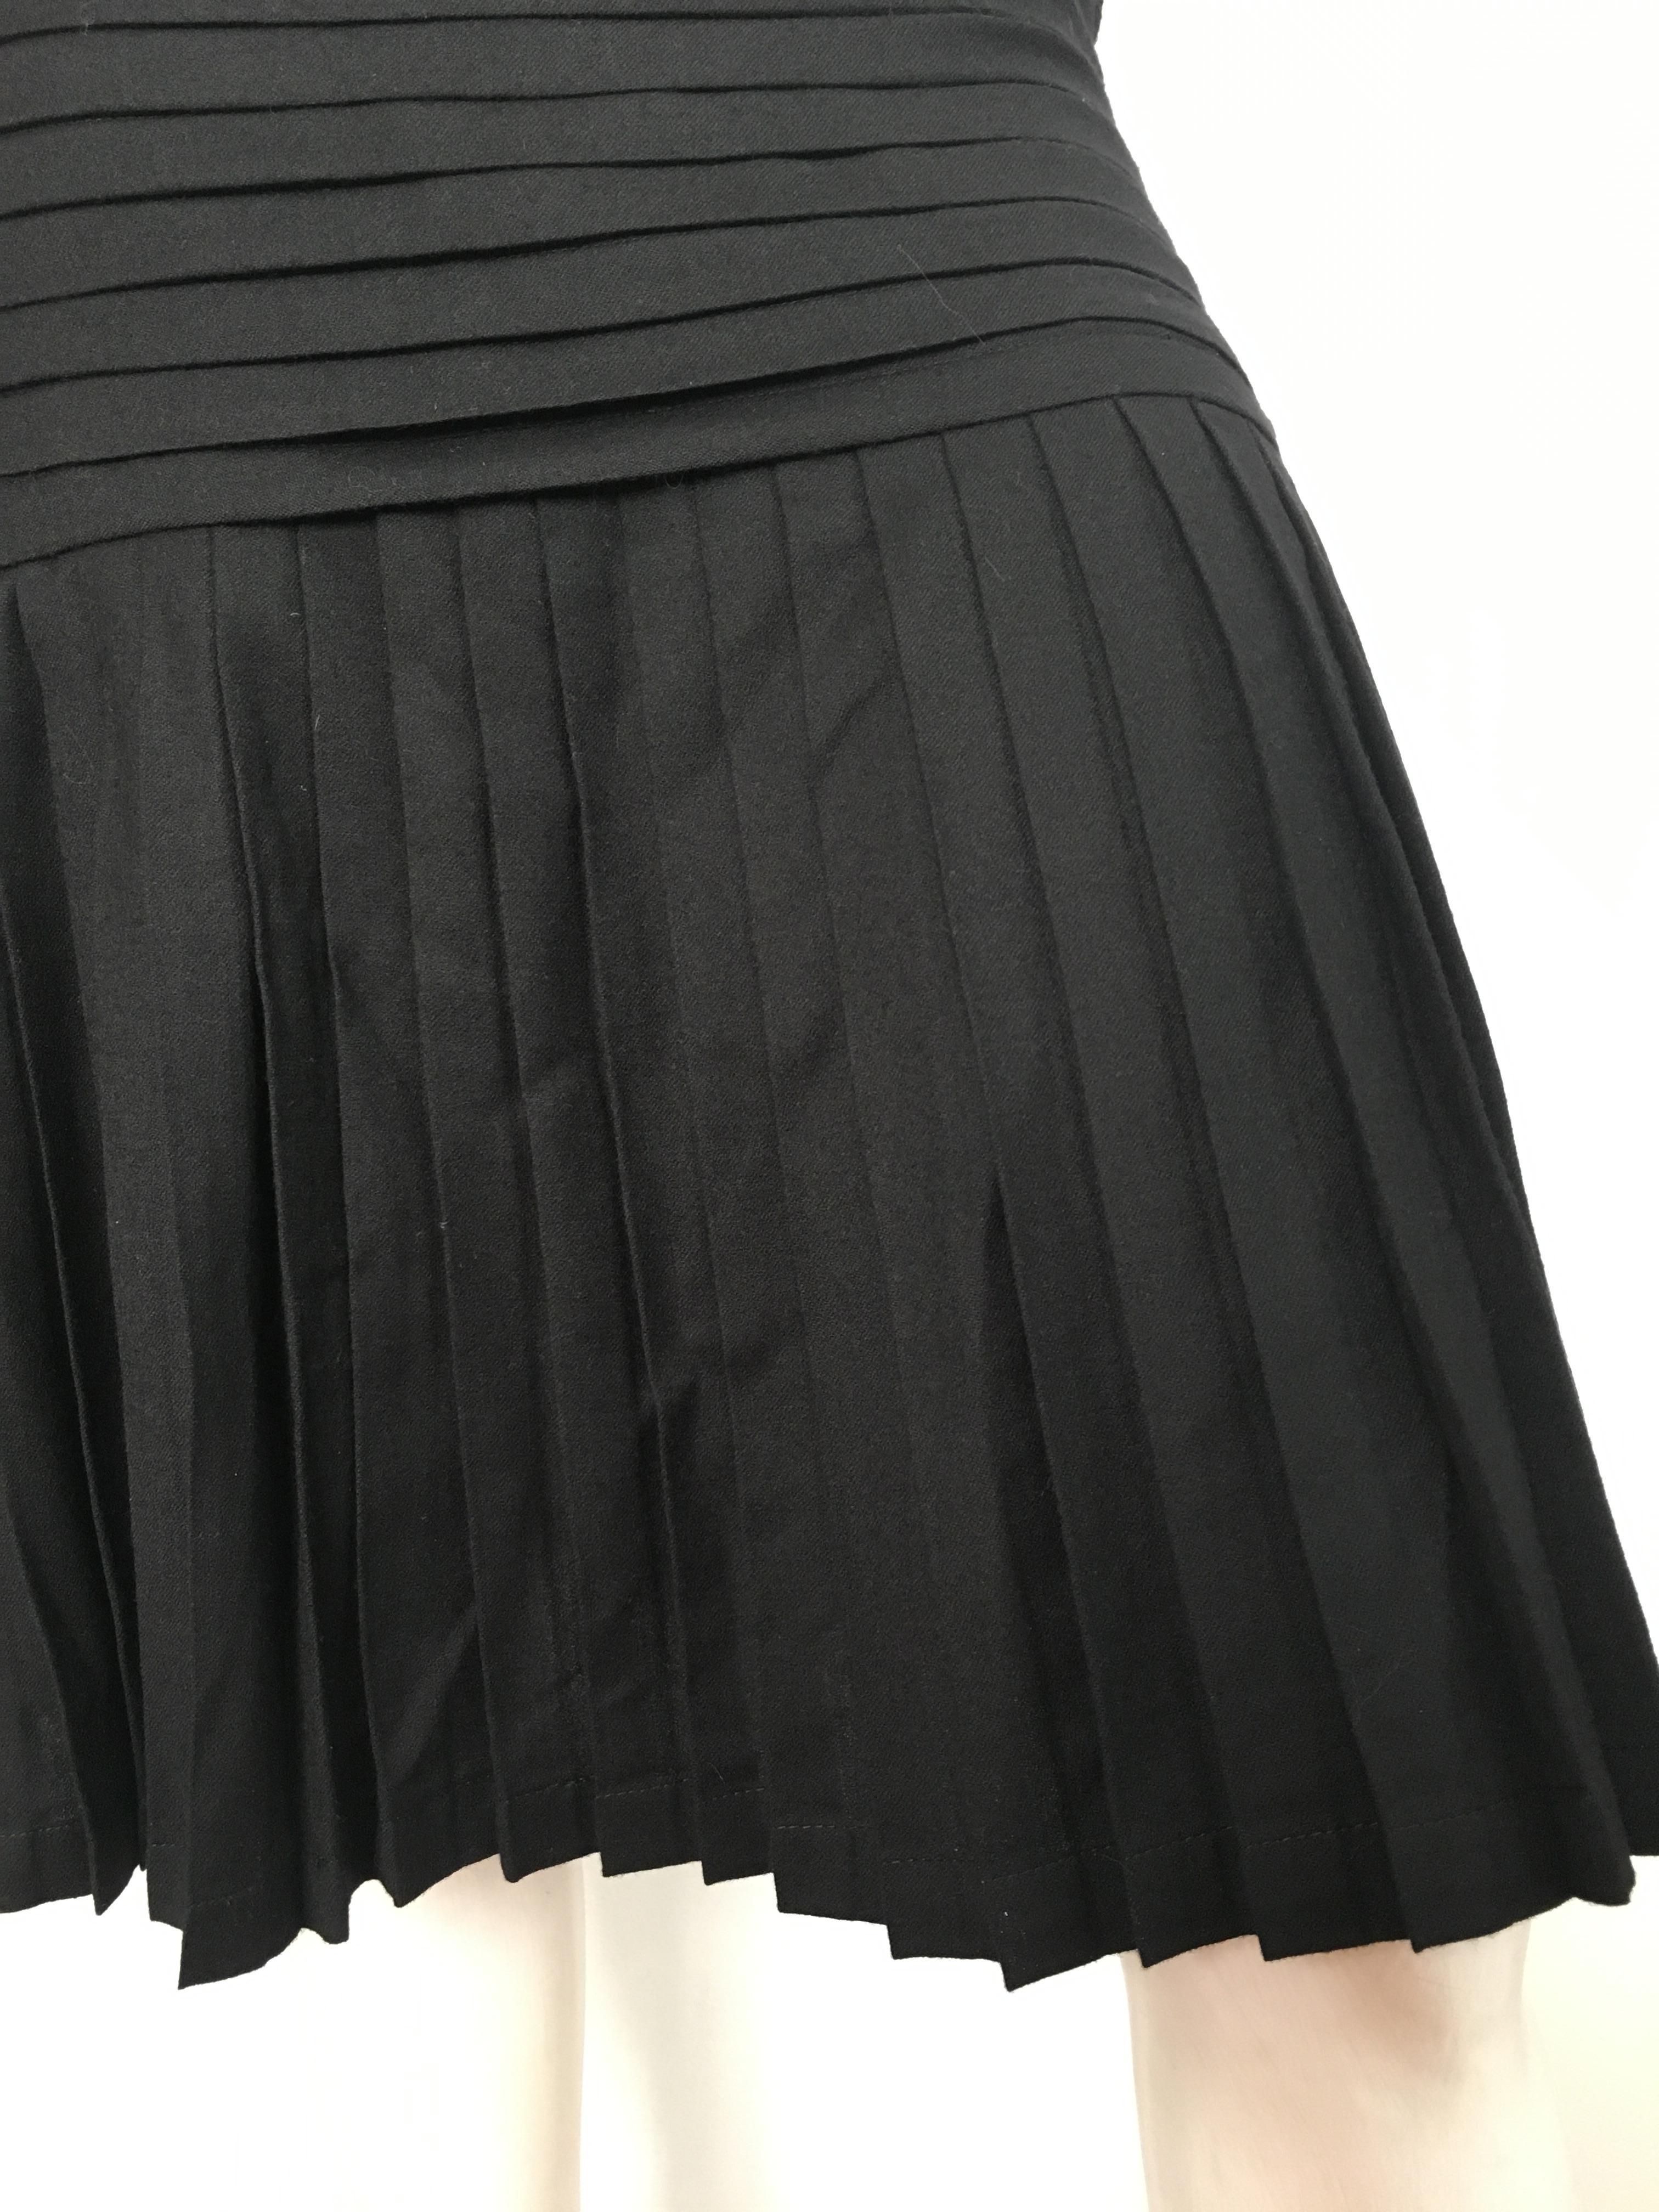 Genny Black Wool Pleated Skirt Size 6. For Sale 7